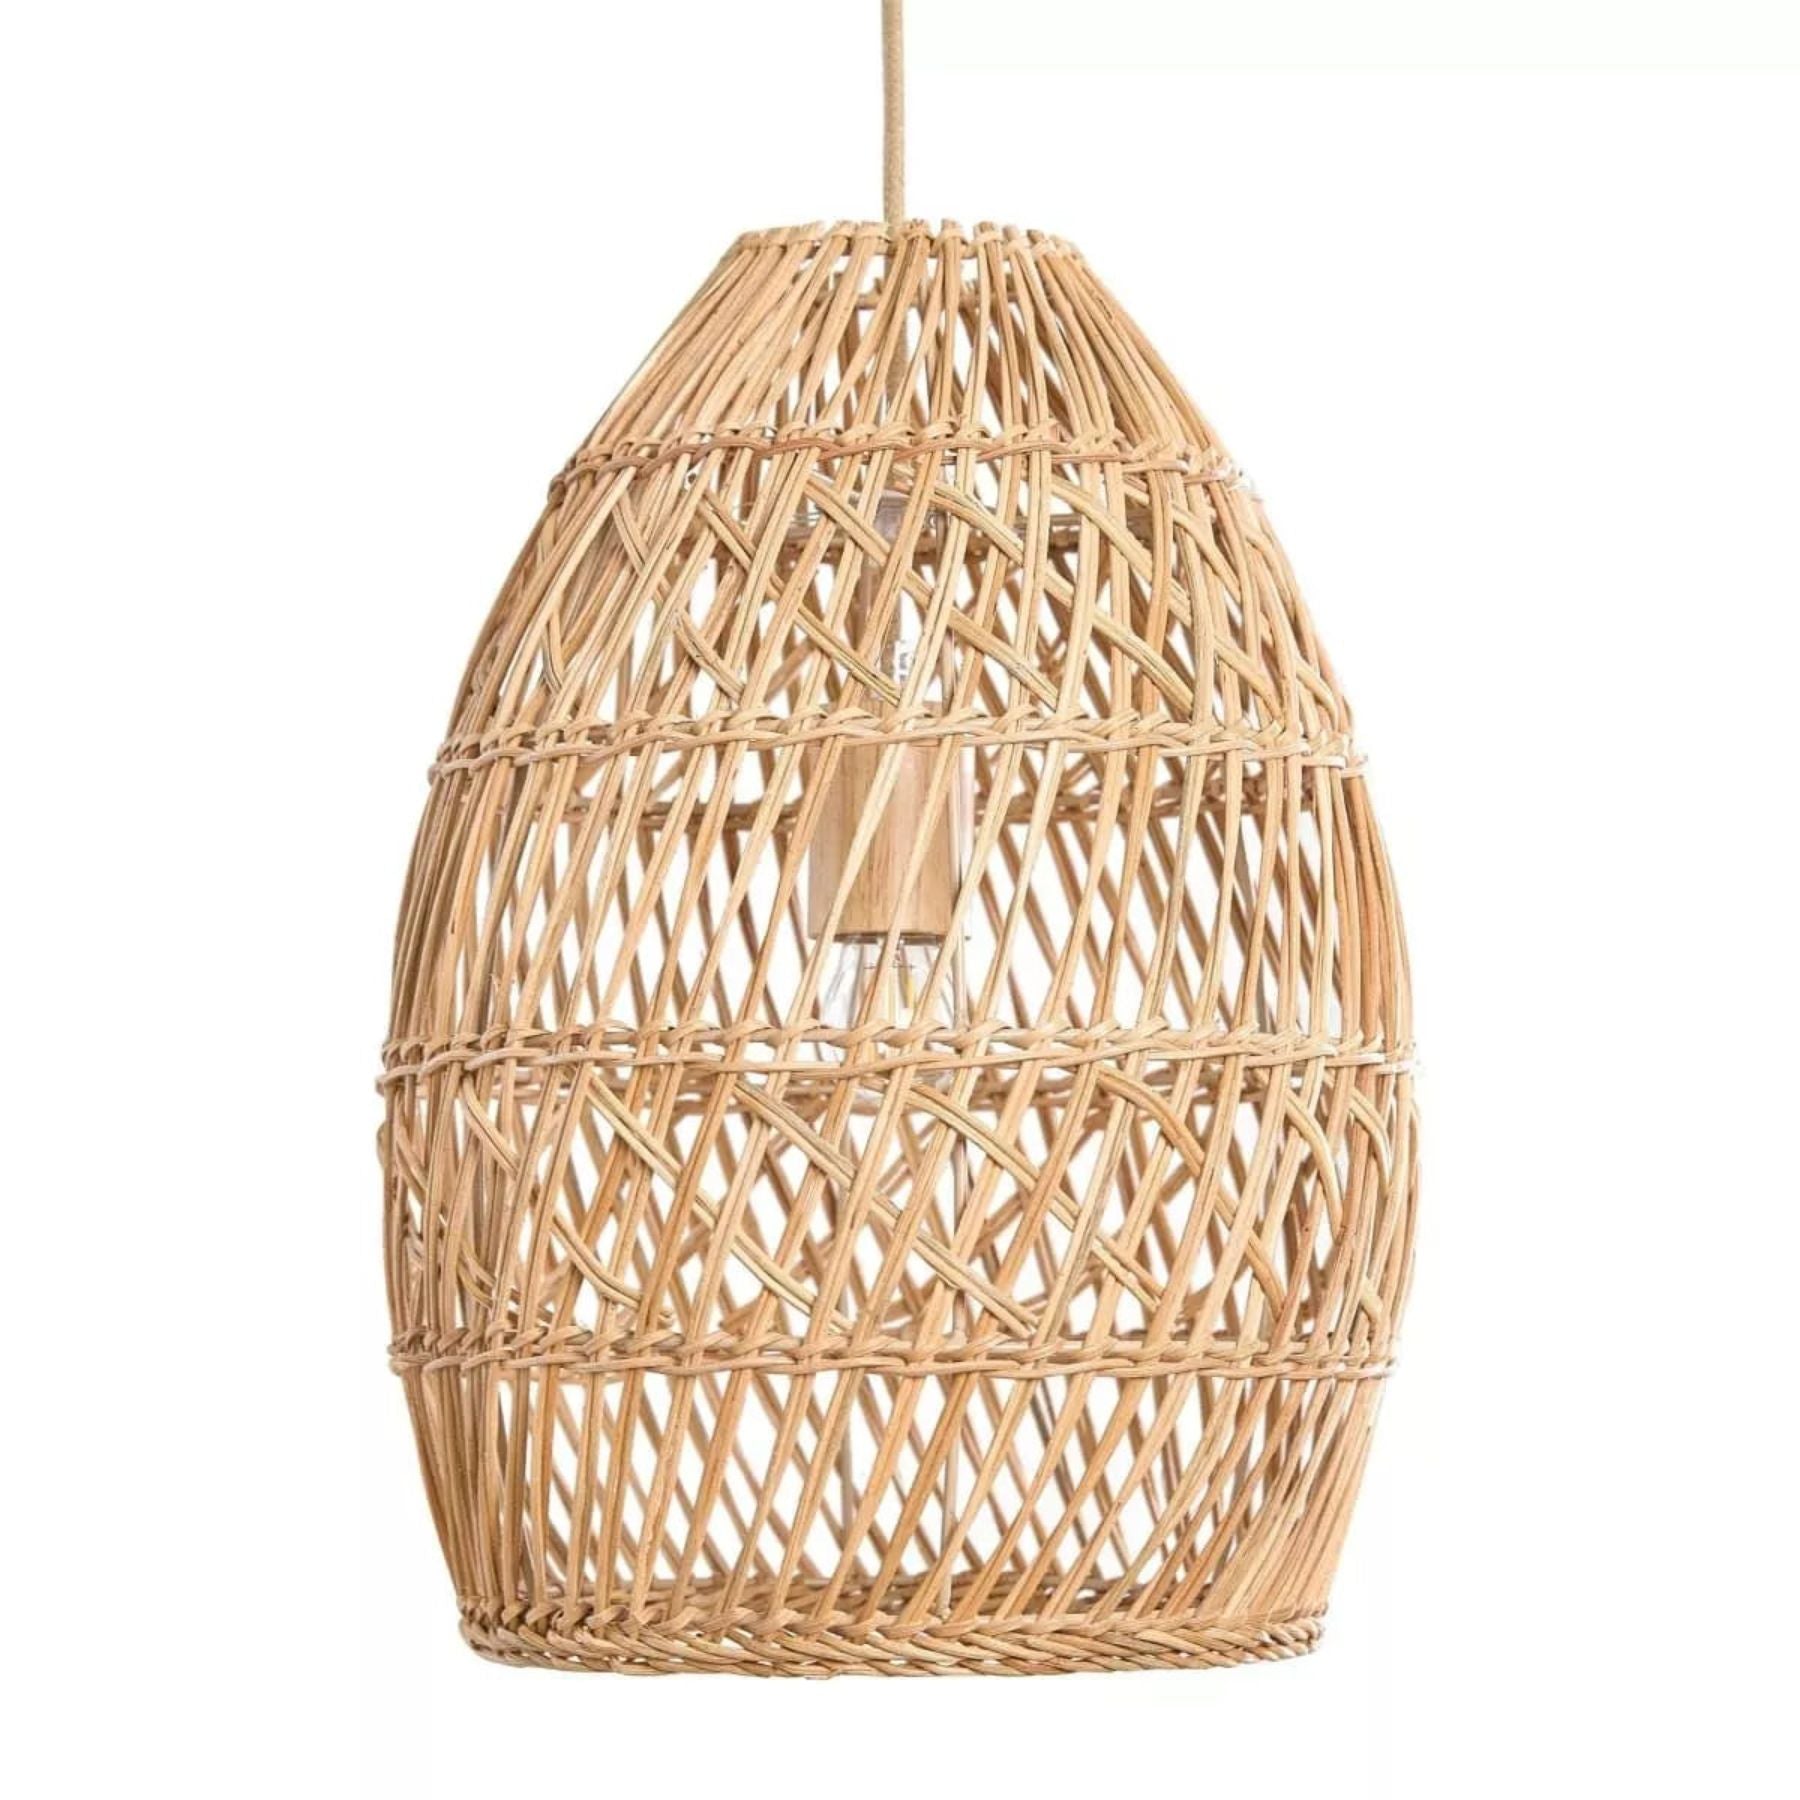 The callie rattan chandelier reflects the textures of nature diffusing light, creating a soothing ripple effect